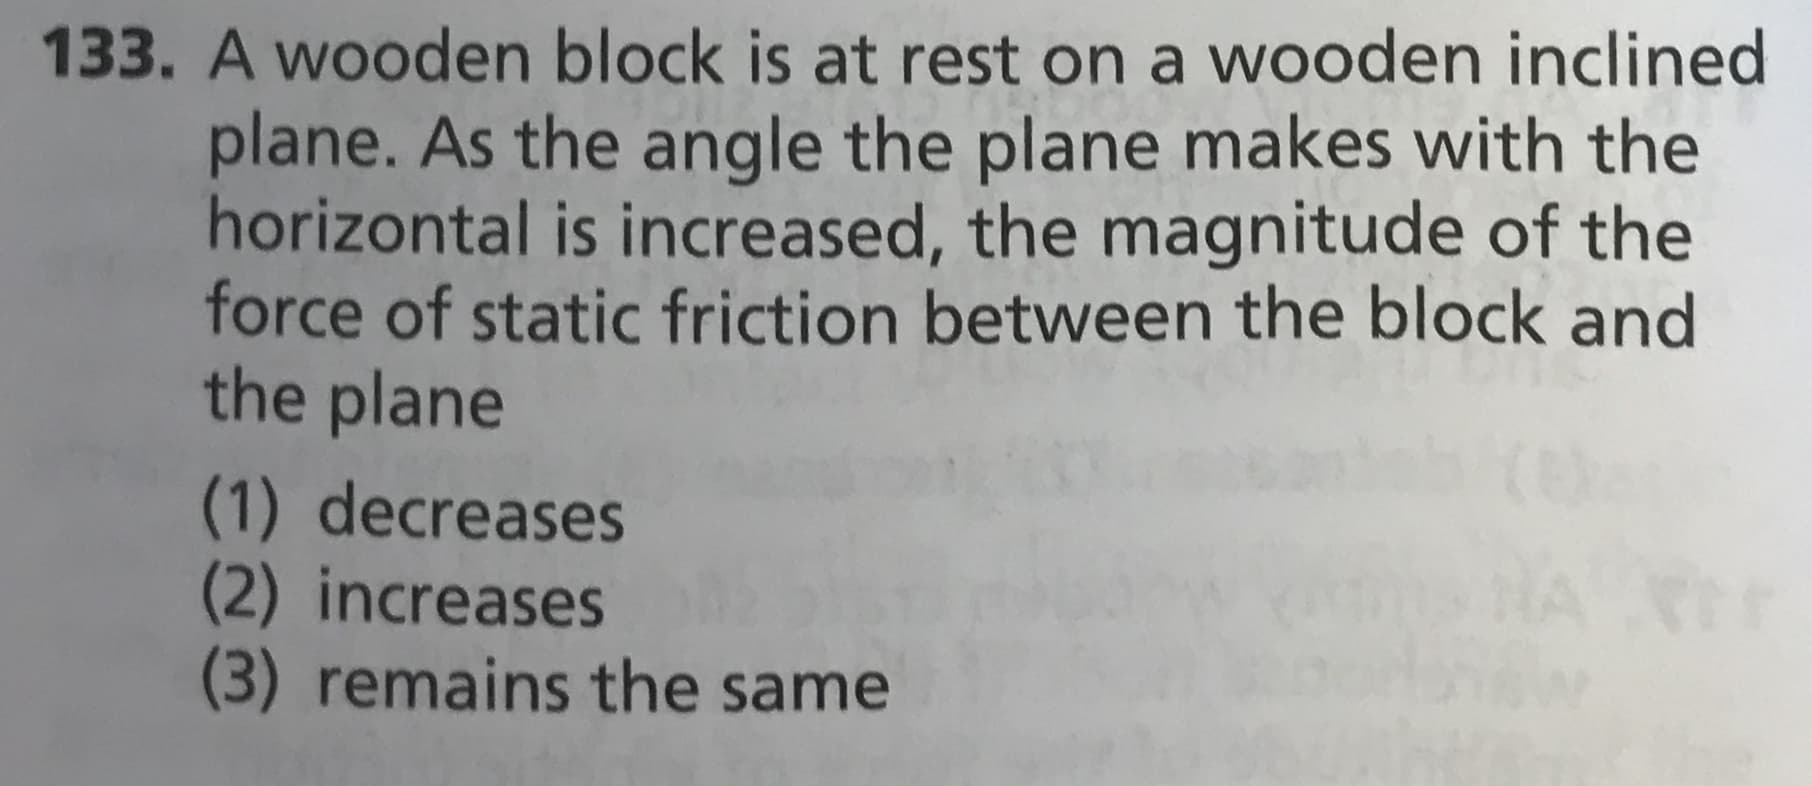 133. A wooden block is
at rest on a wooden inclined
plane. As the angle the plane makes with the
horizontal is increased, the magnitude of the
force of static friction between the block and
the plane
(1) decreases
(2) increases
(3) remains the same
